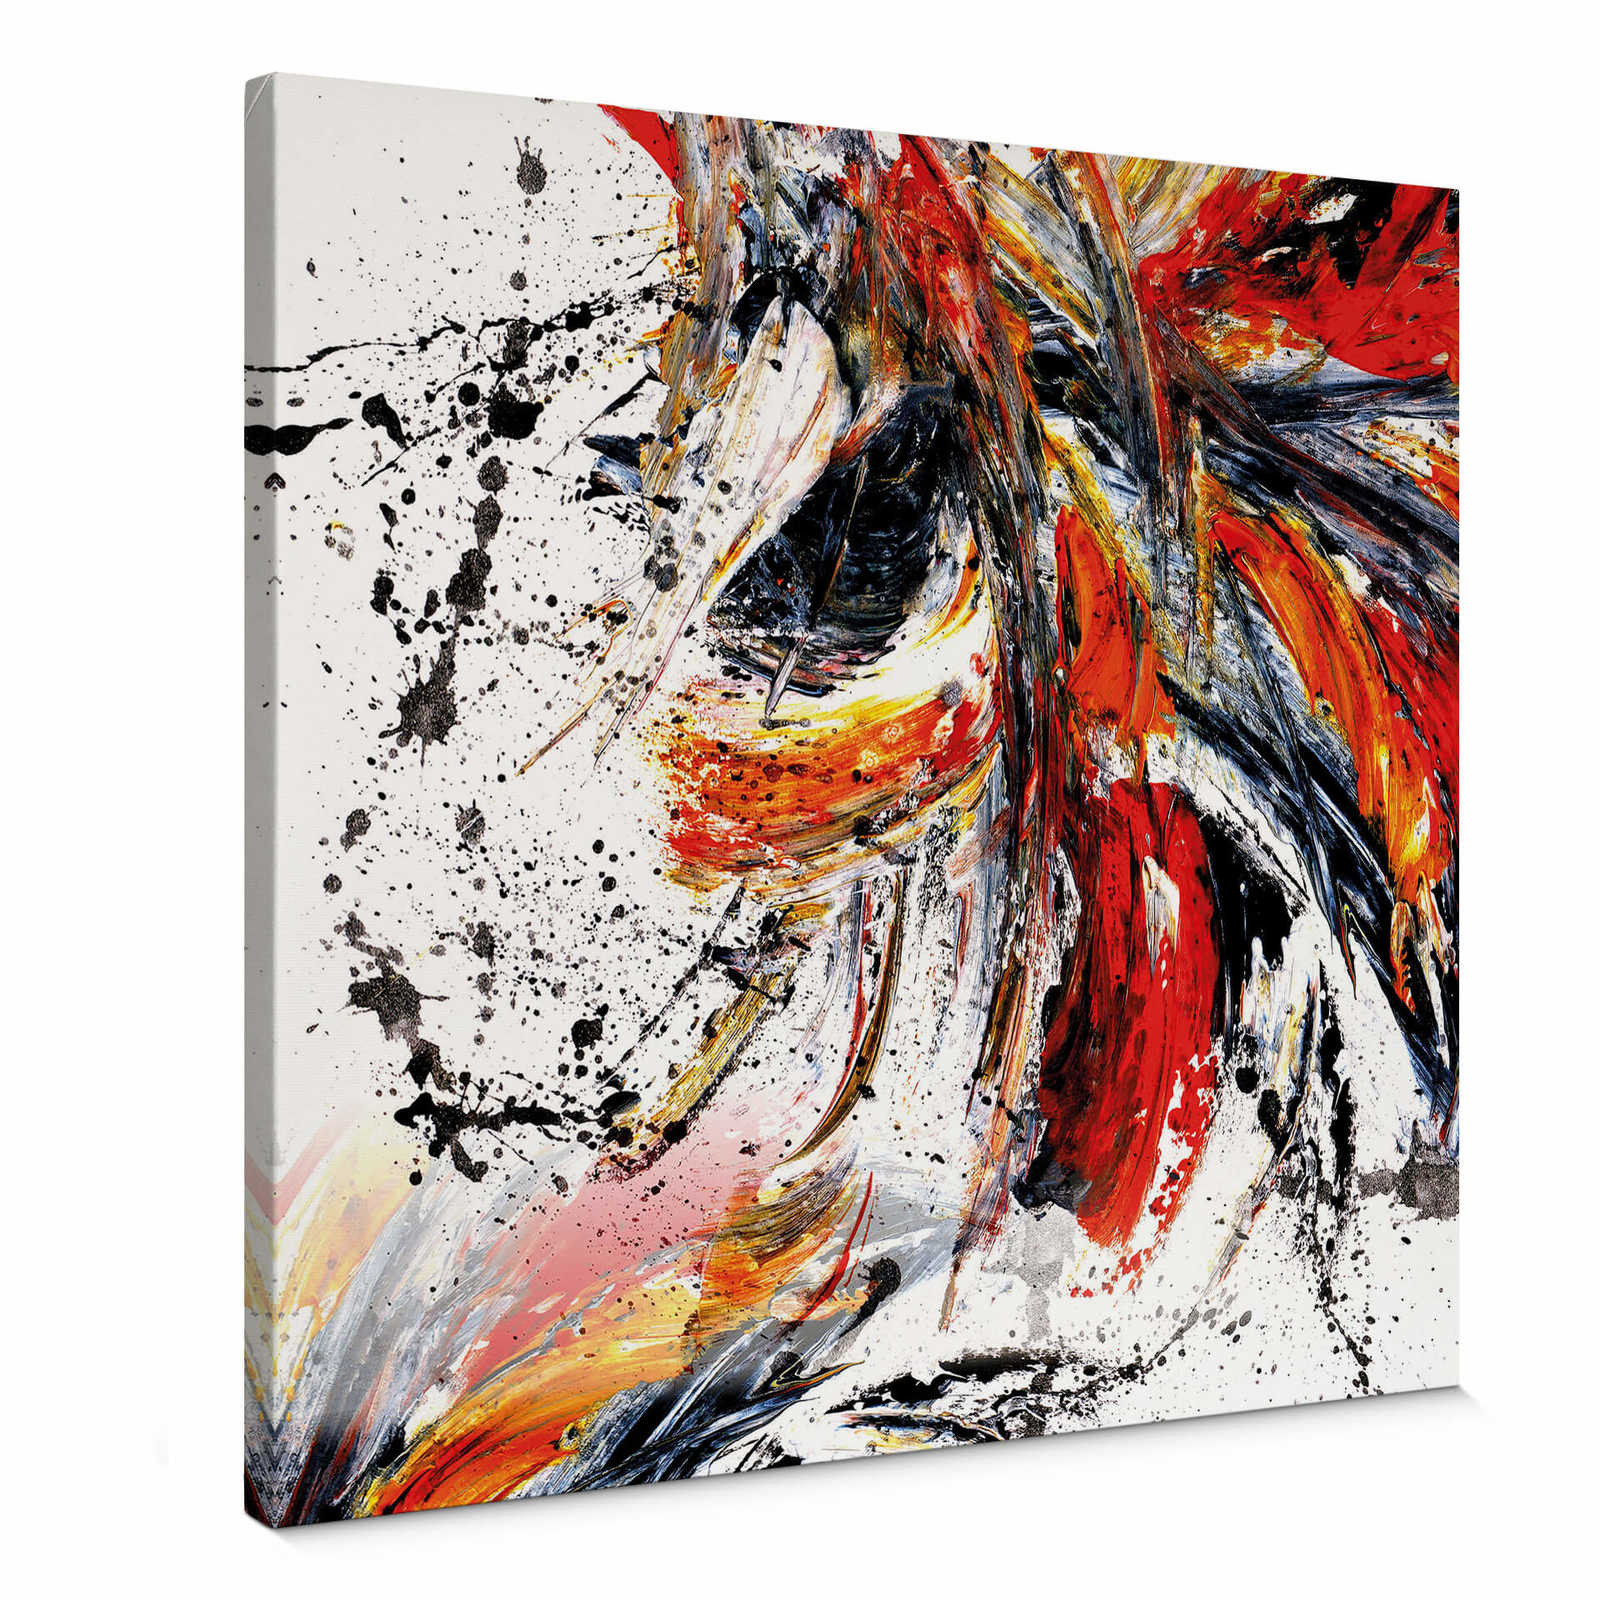         Square canvas picture, abstract art by Niksic
    